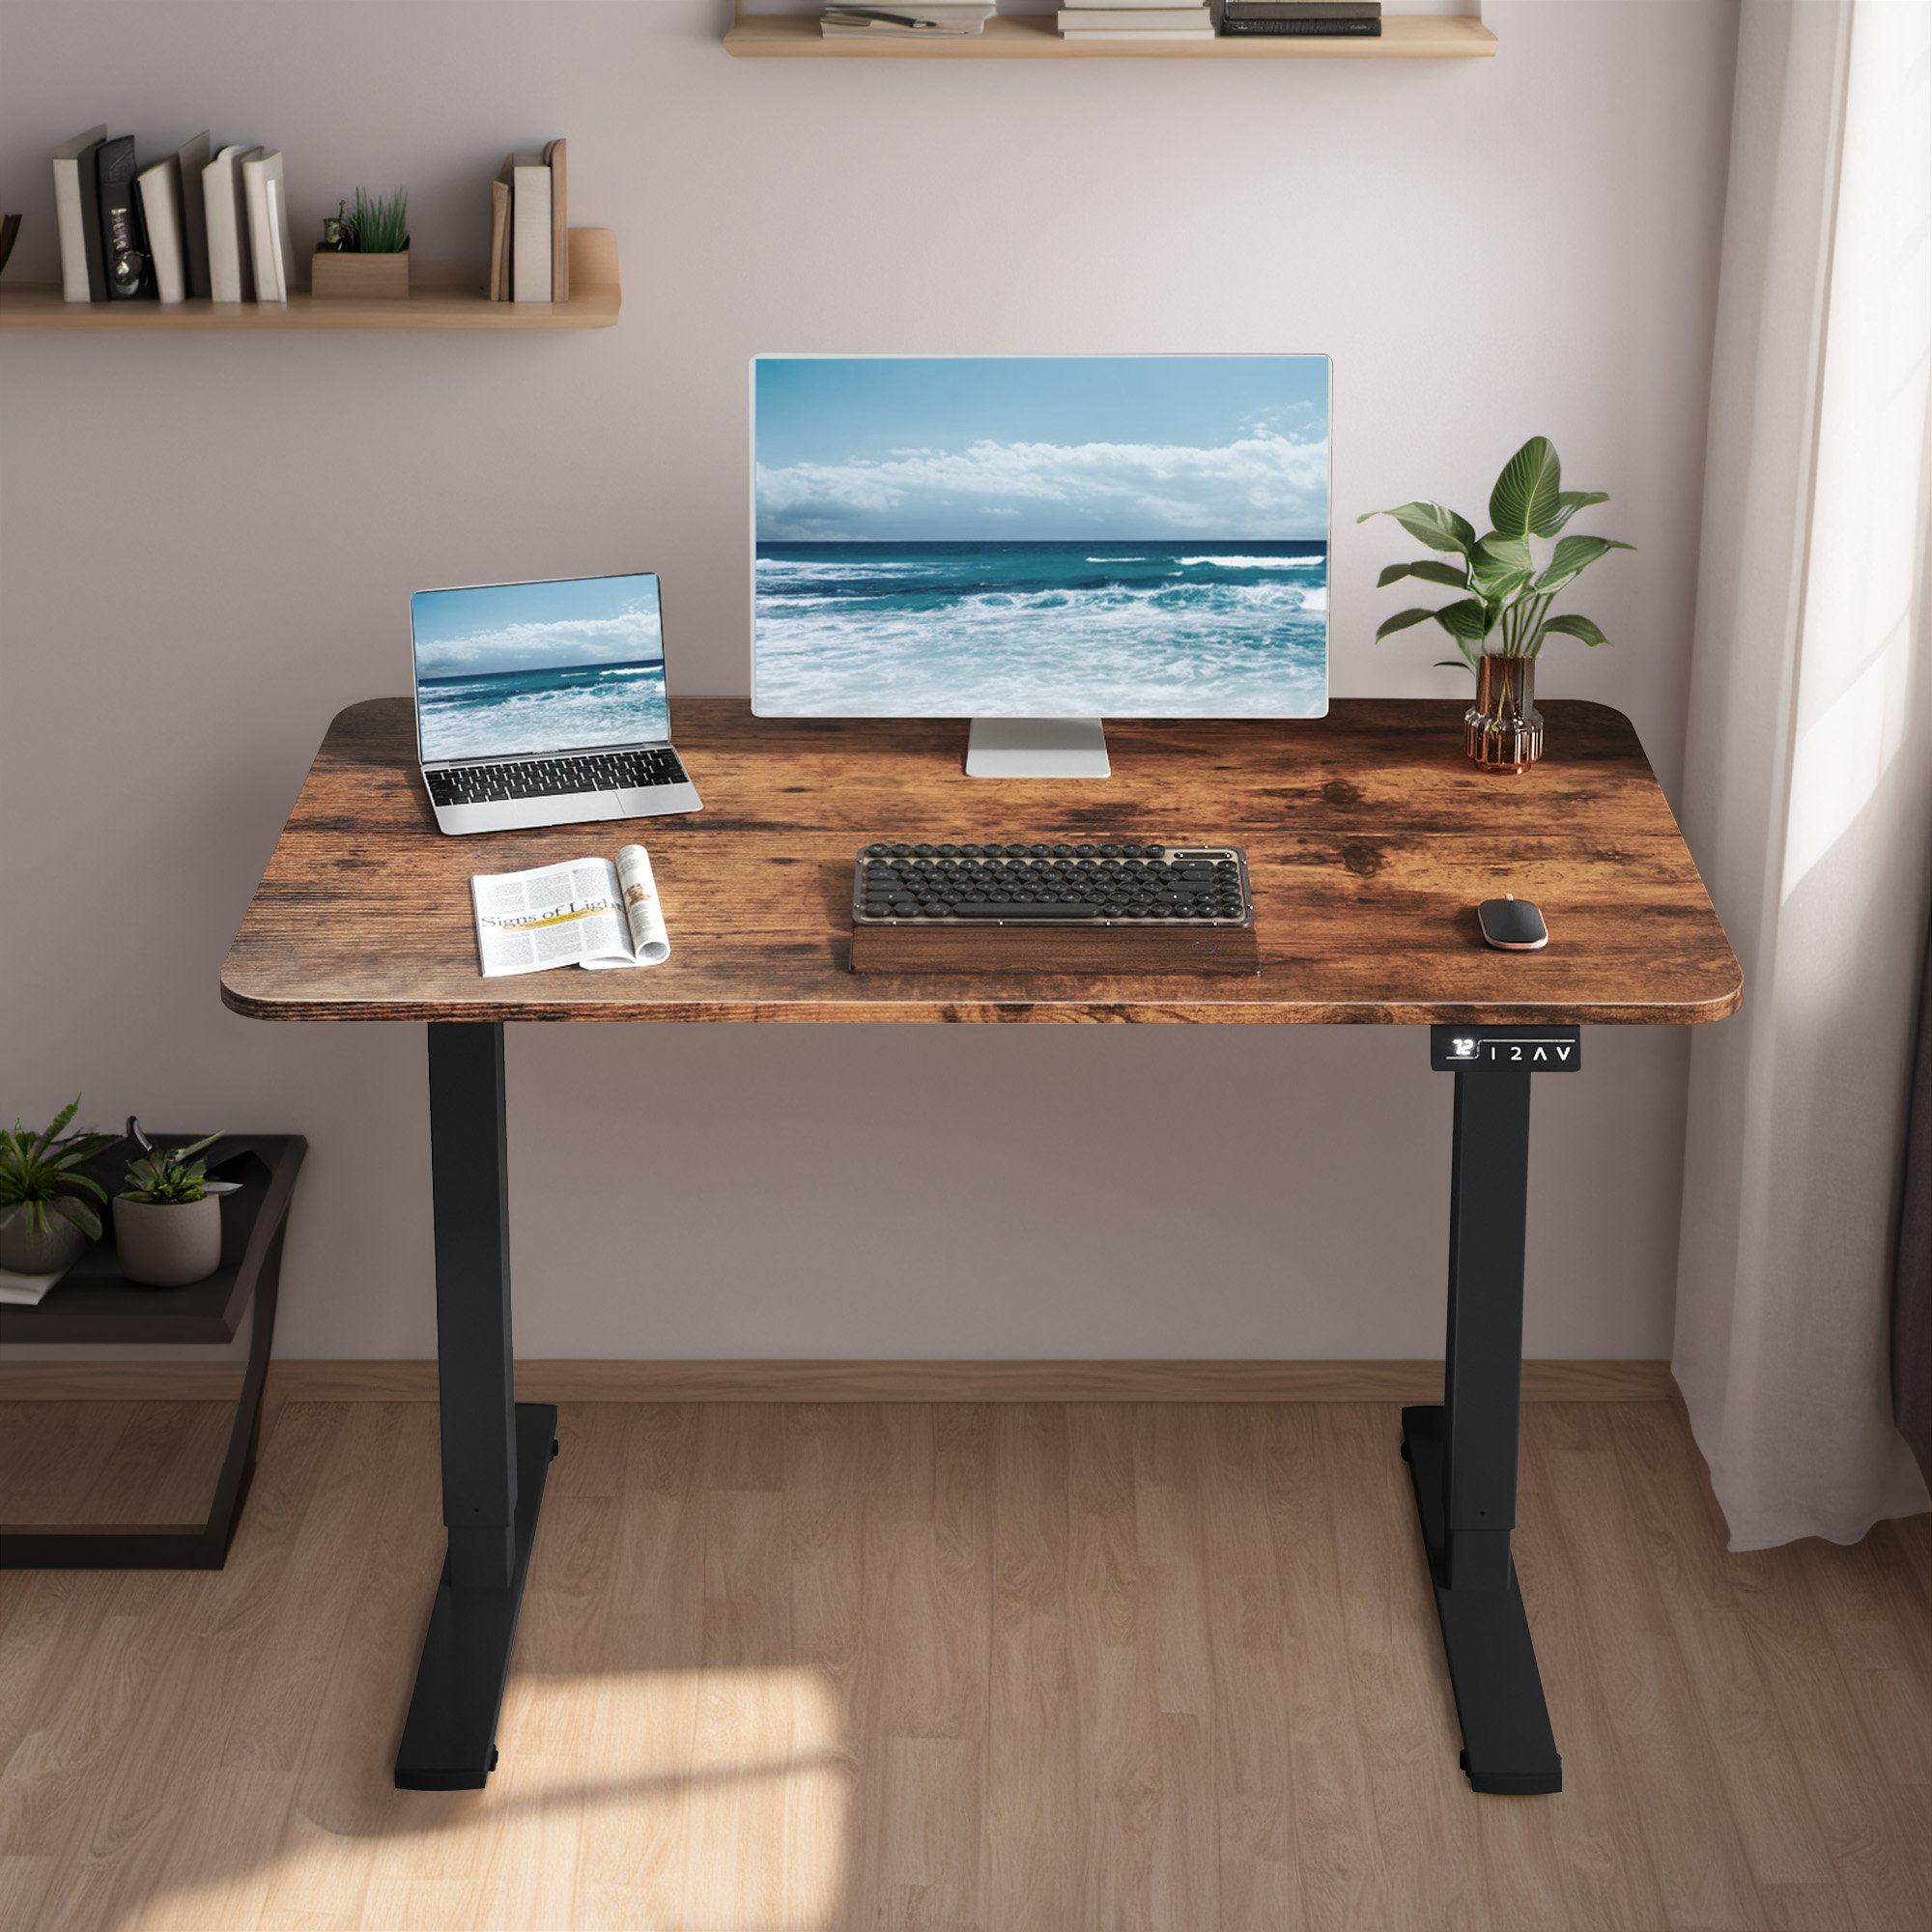 This wood monitor stand desk accessory brings improved ergonomics